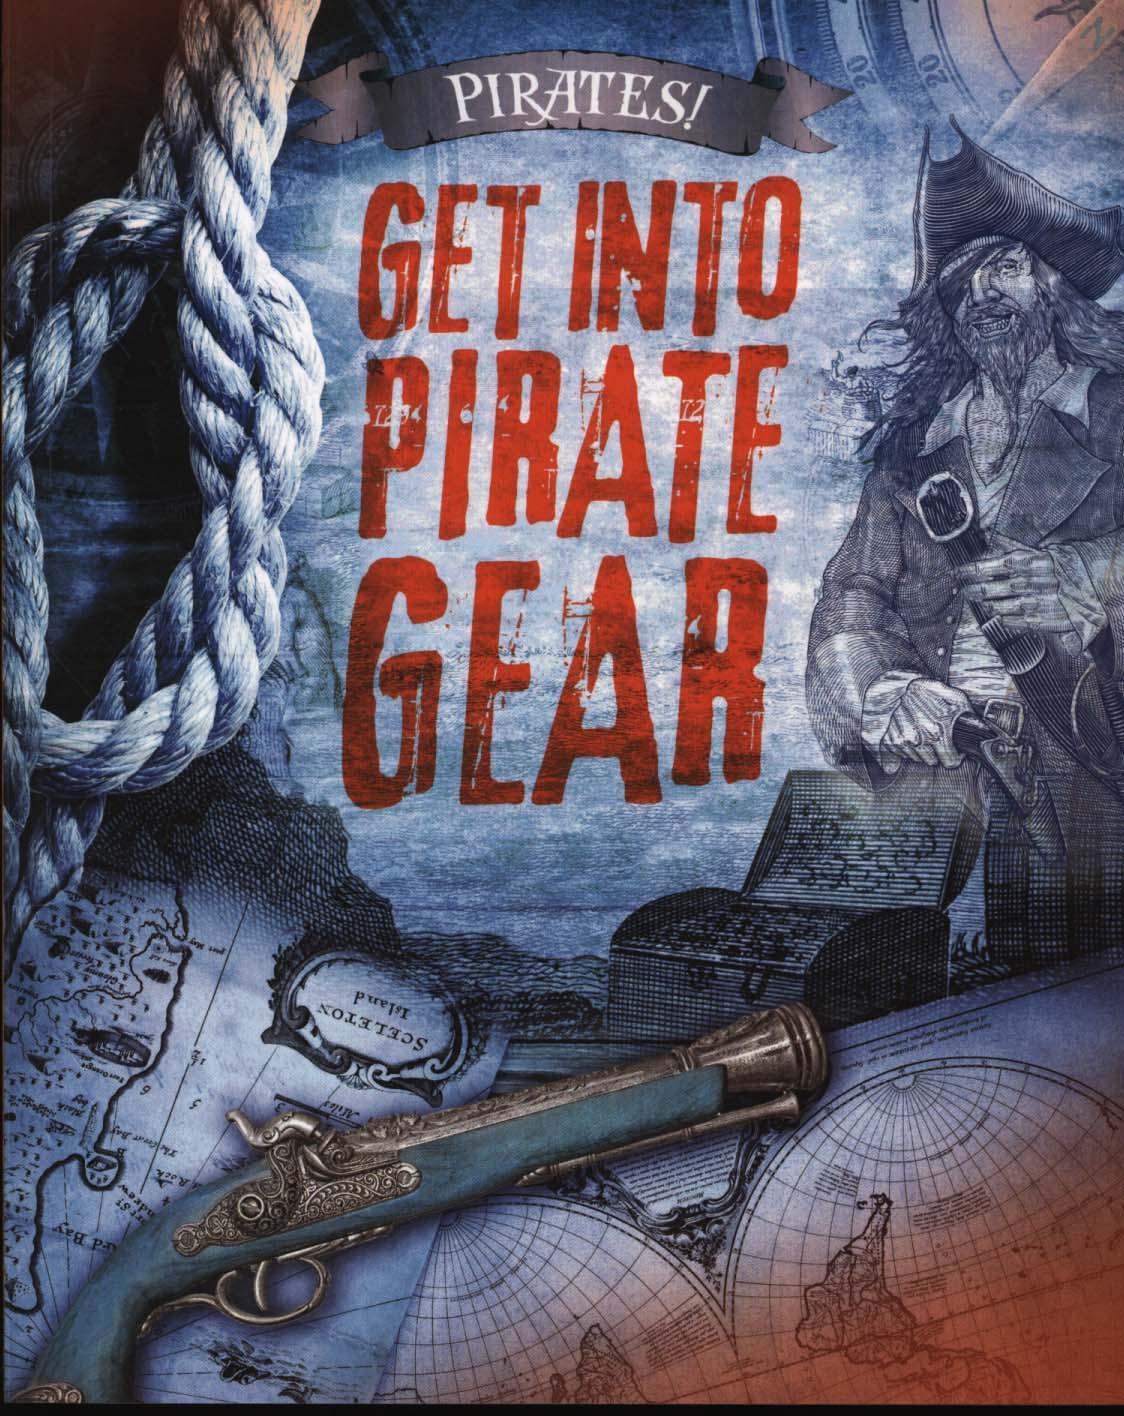 Get into Pirate Gear